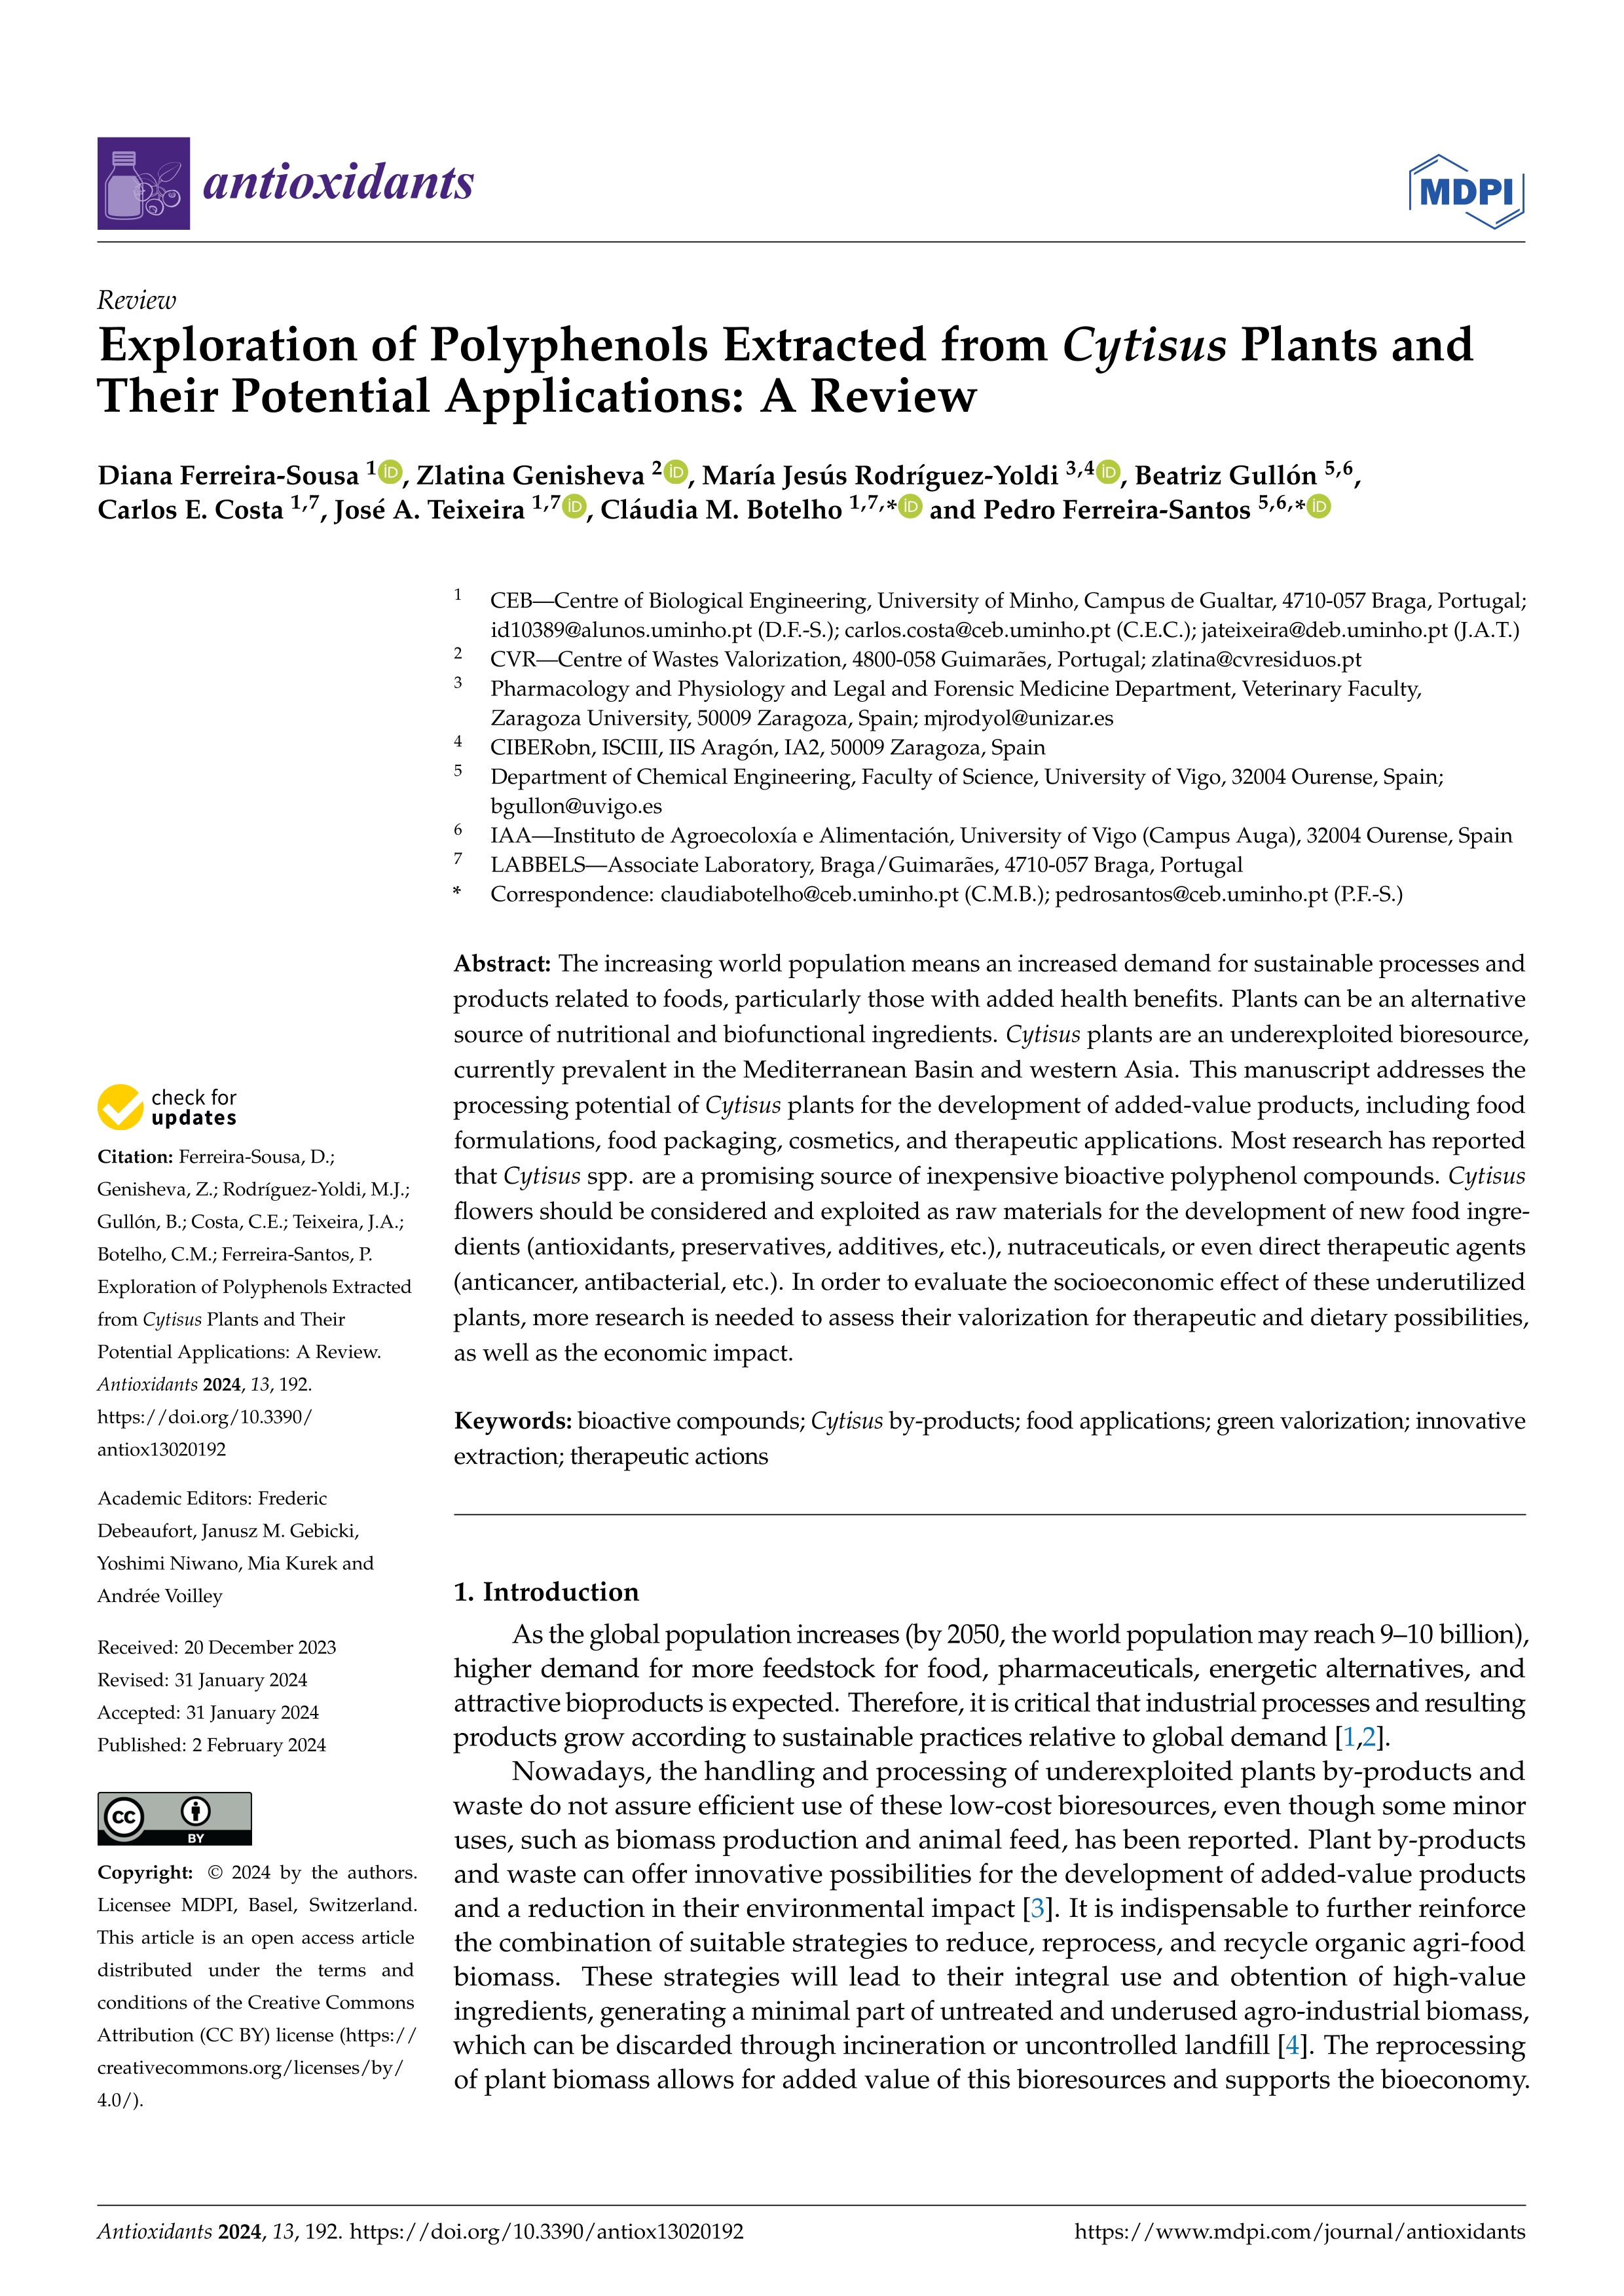 Exploration of Polyphenols Extracted from Cytisus Plants and Their Potential Applications: A Review